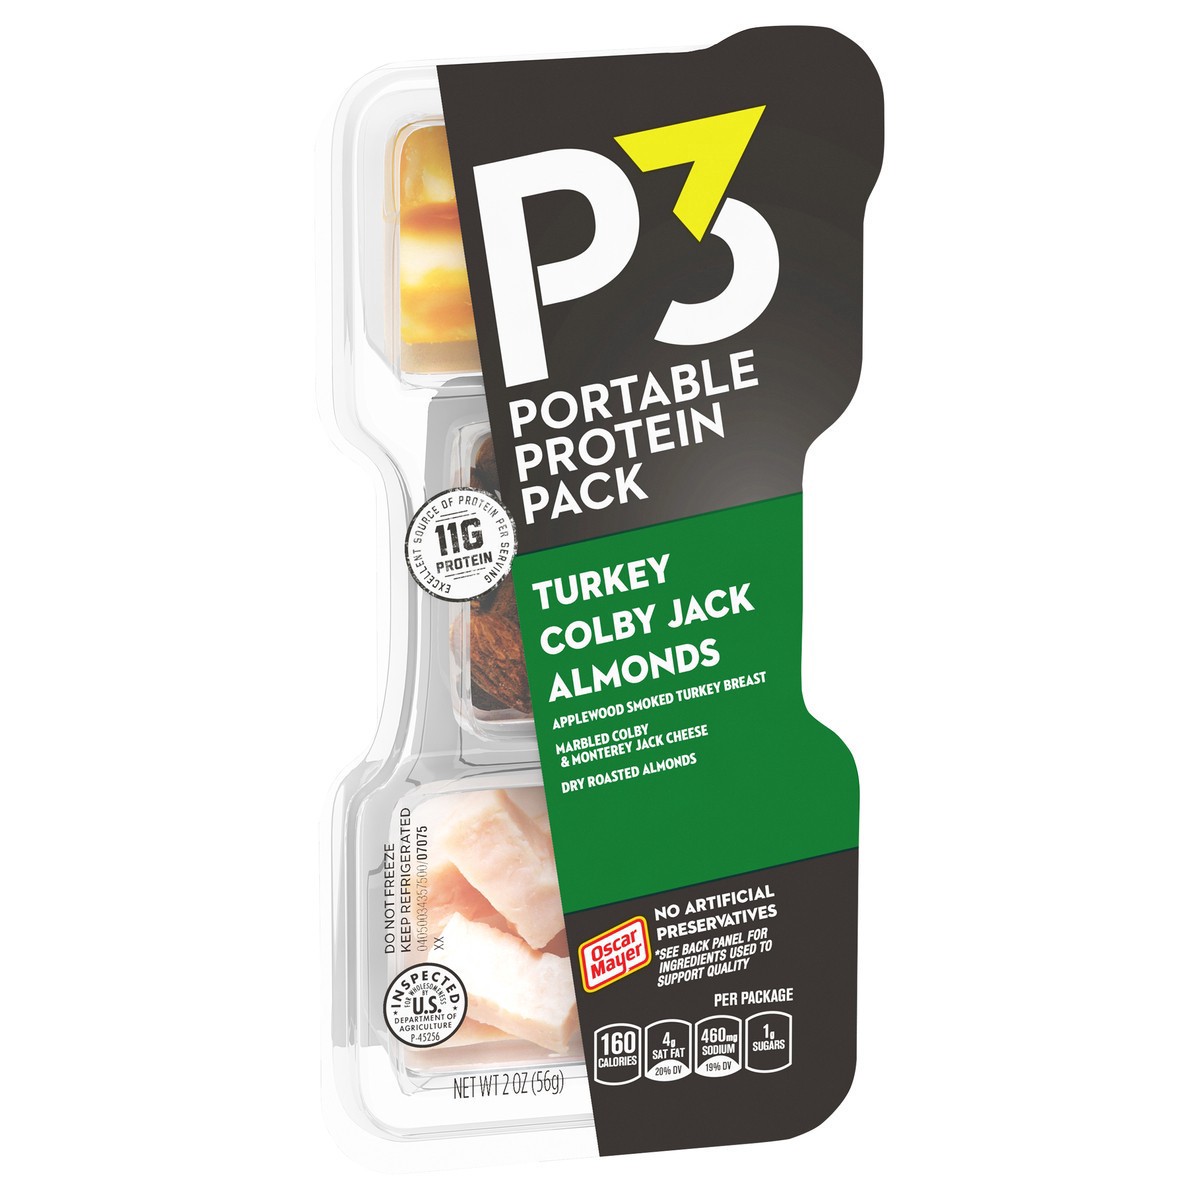 slide 2 of 9, P3 Portable Protein Pack Turkey, Almonds Colby Jack Cheese, for a Low Carb Lifestyle, 2 oz Tray, 2 oz